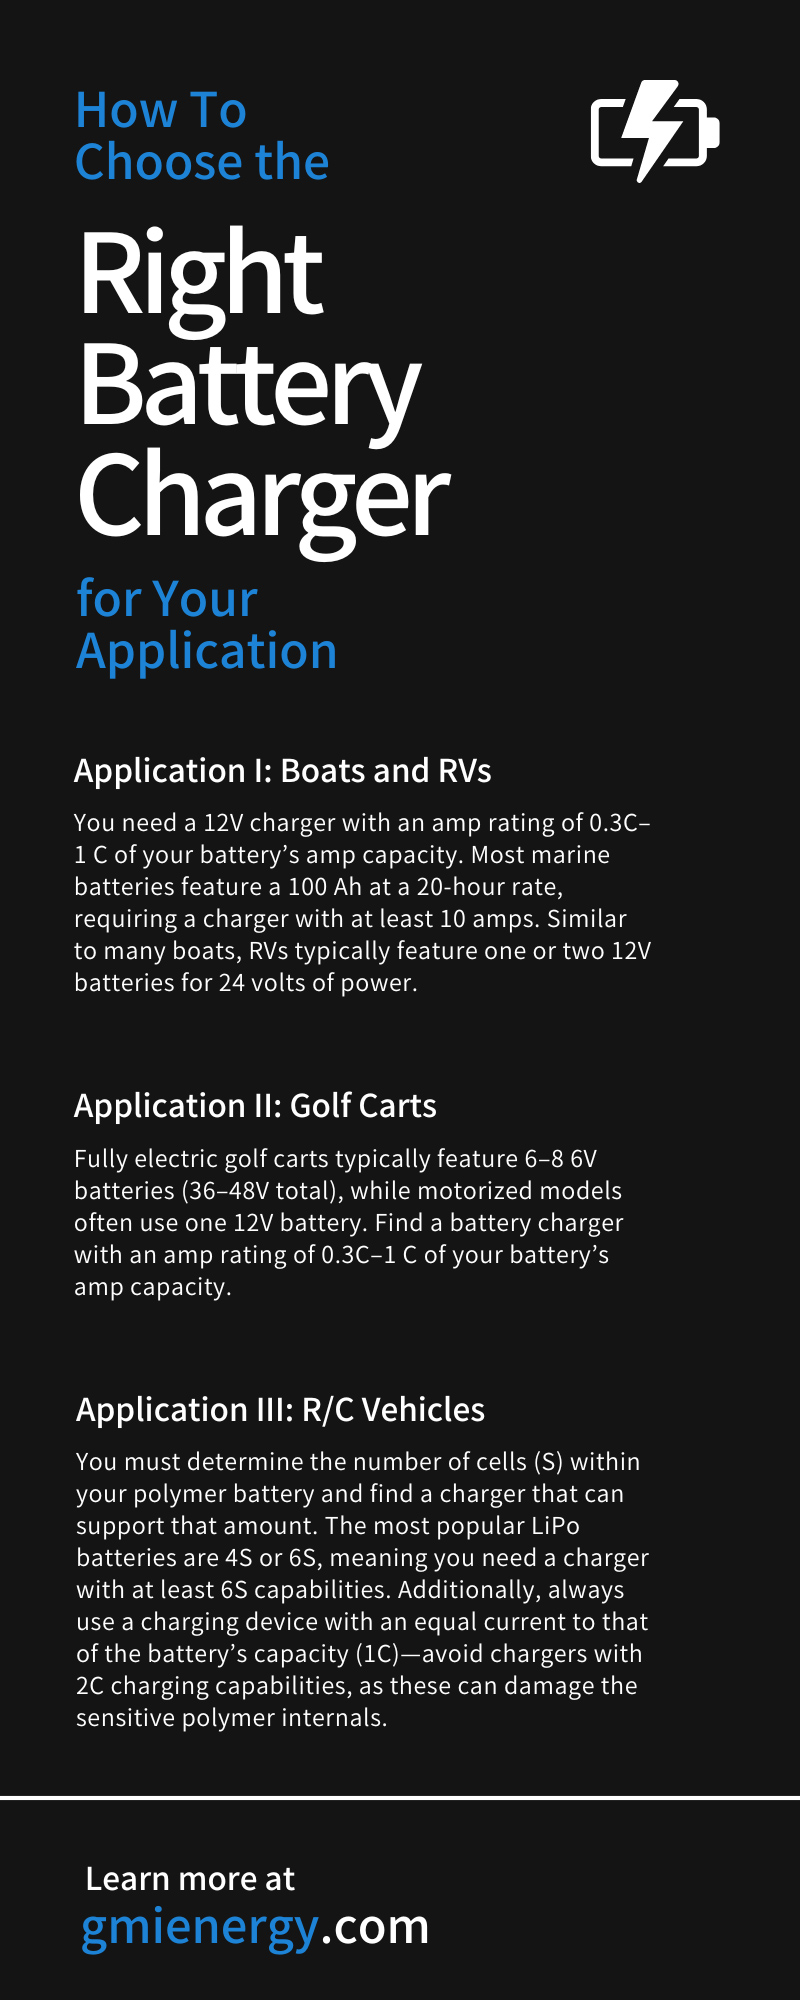 How To Choose the Right Battery Charger for Your Application